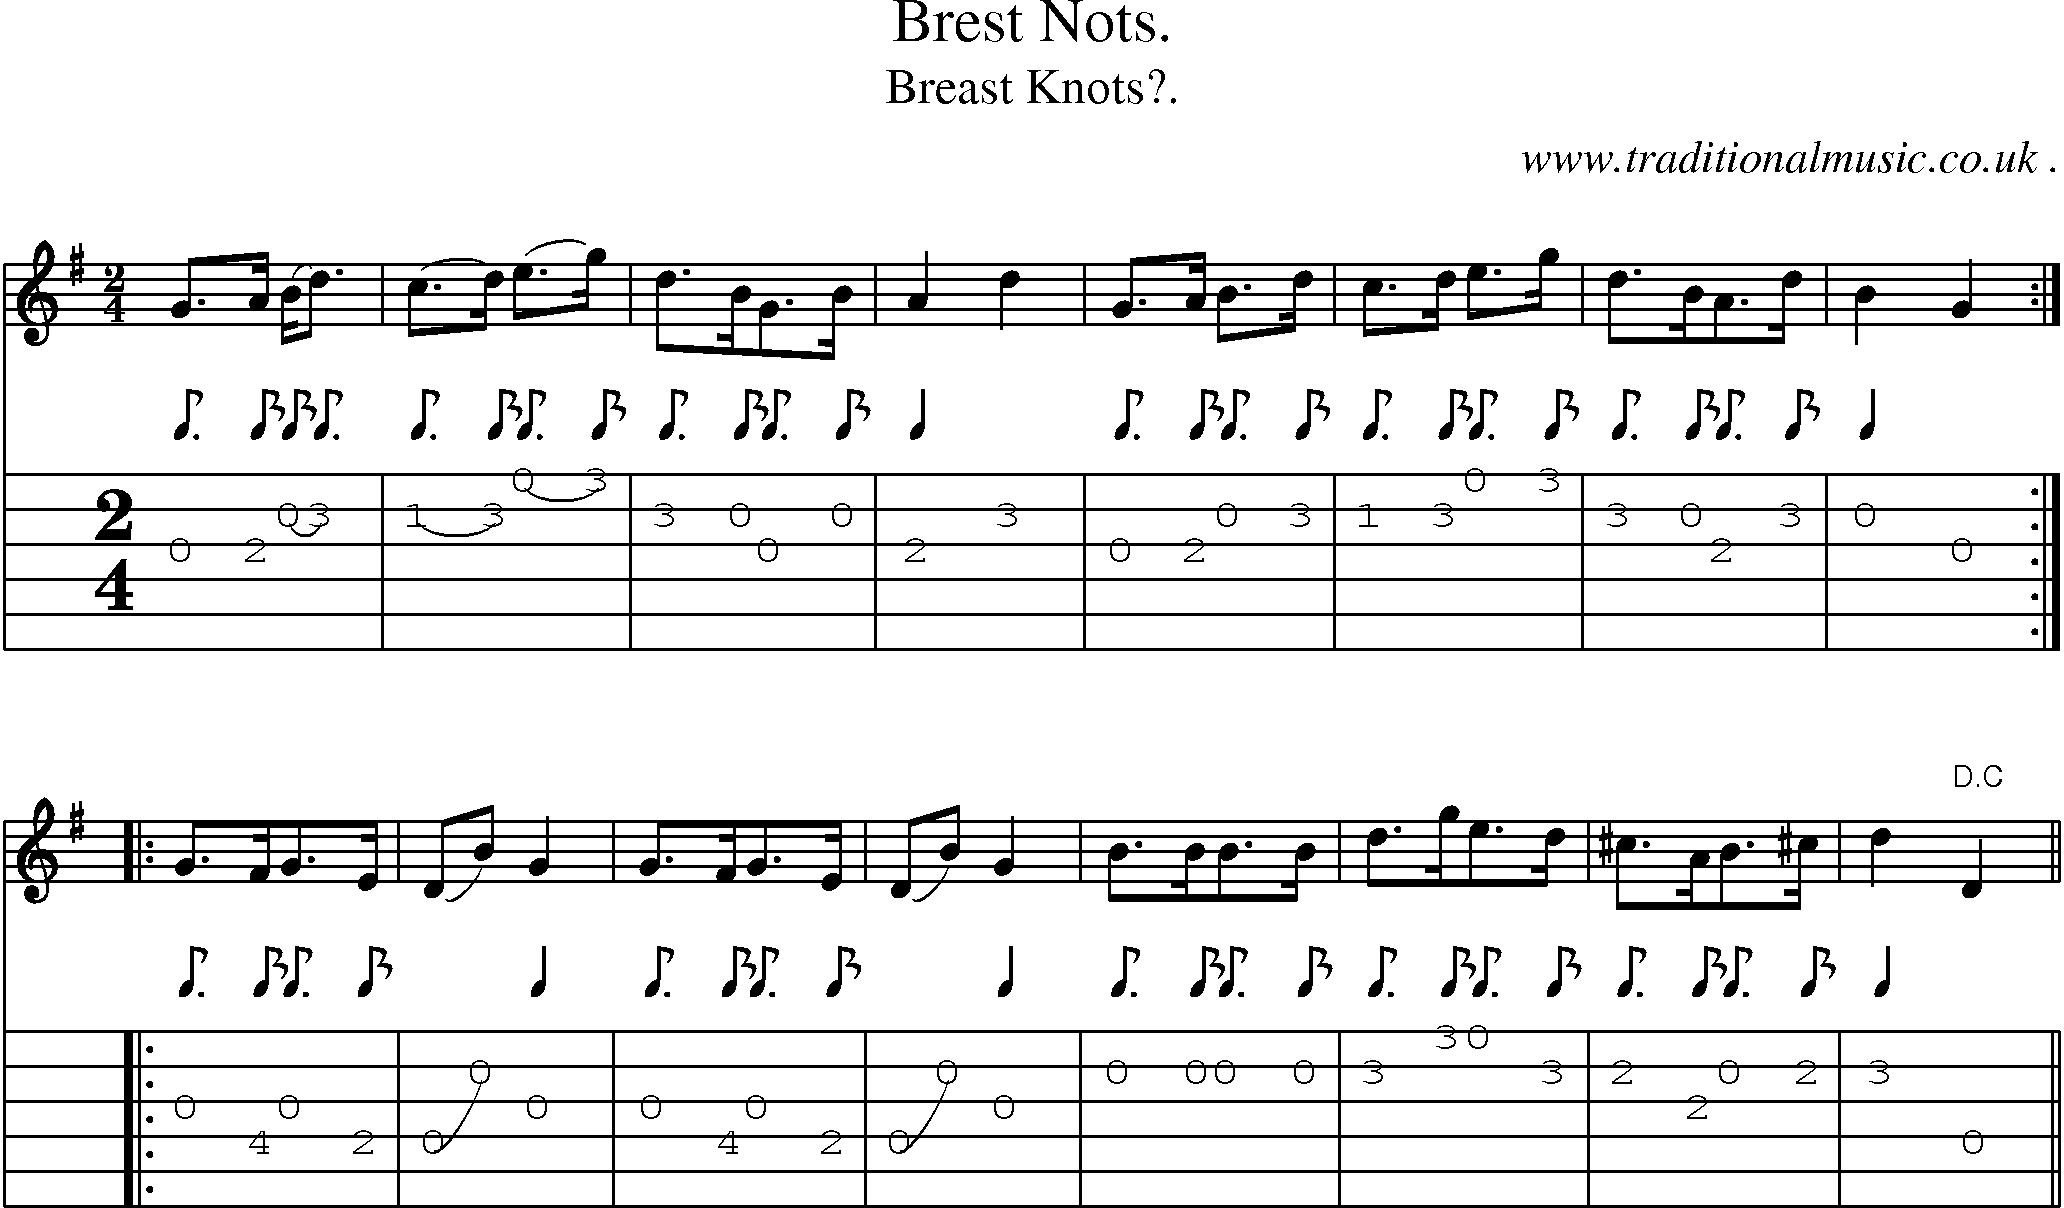 Sheet-Music and Guitar Tabs for Brest Nots